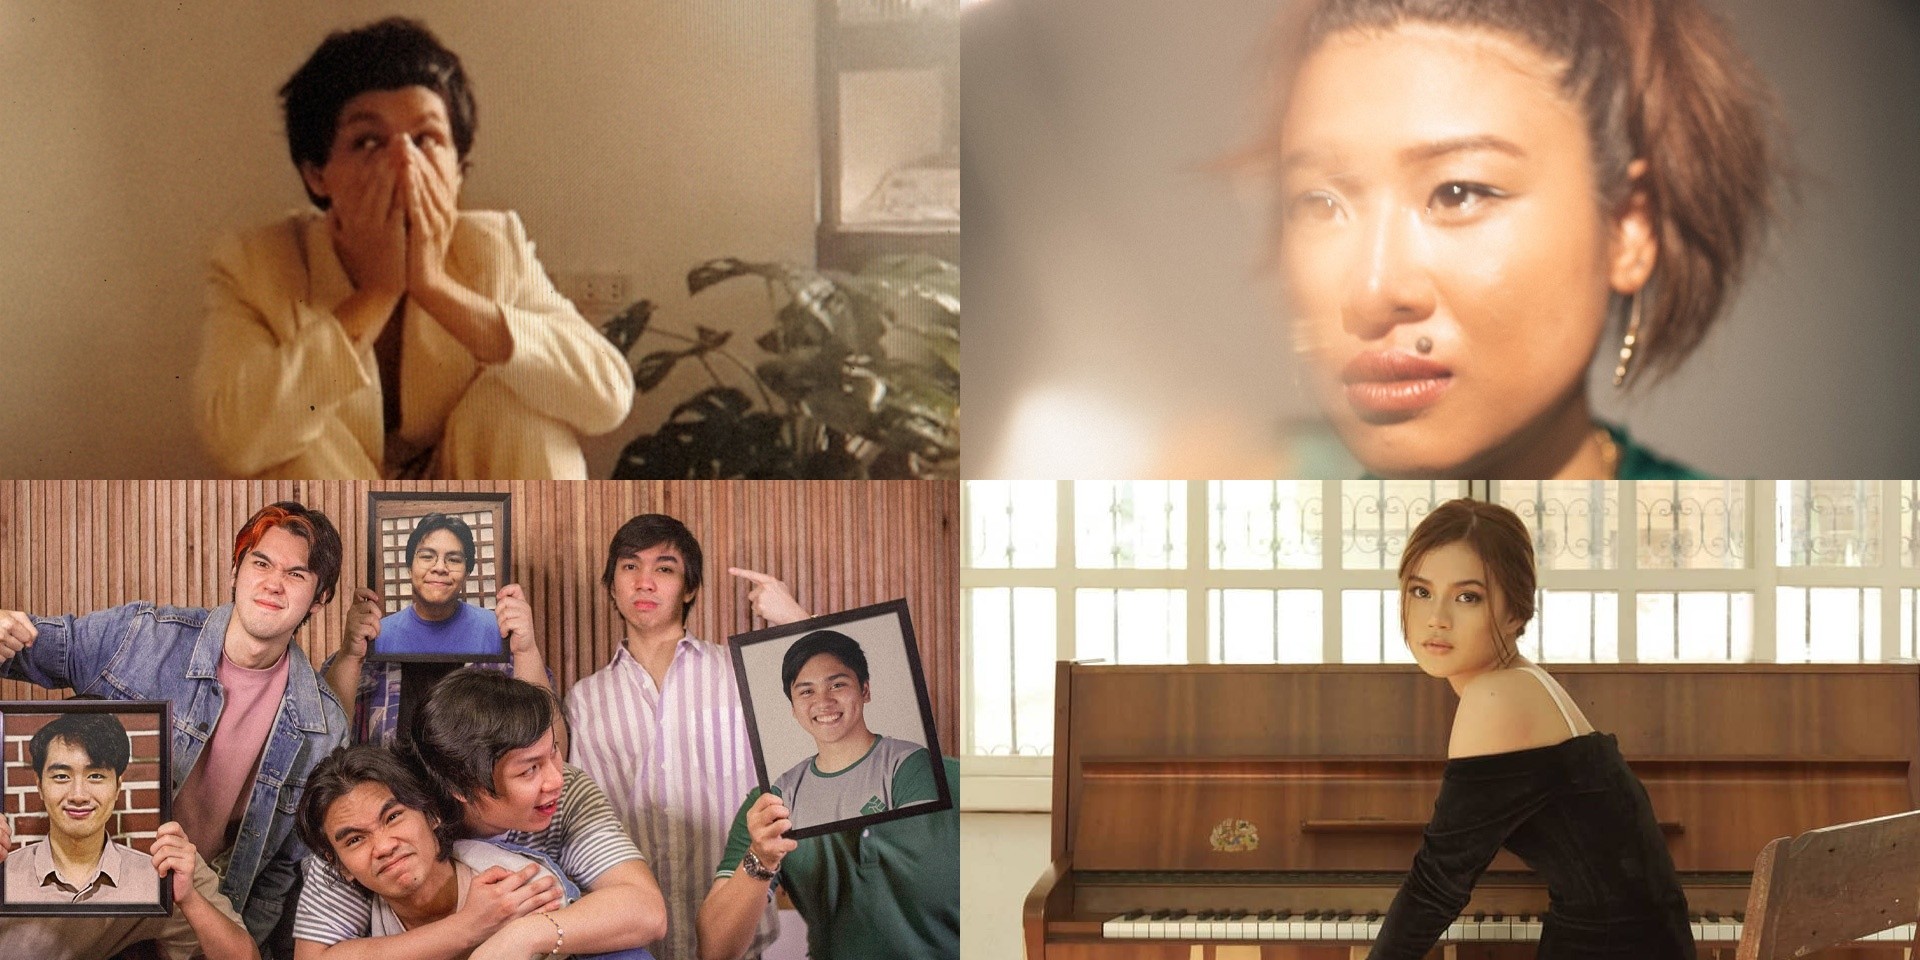 Zild, Maris Racal, August Wahh, Lola Amour, and more release new music – listen